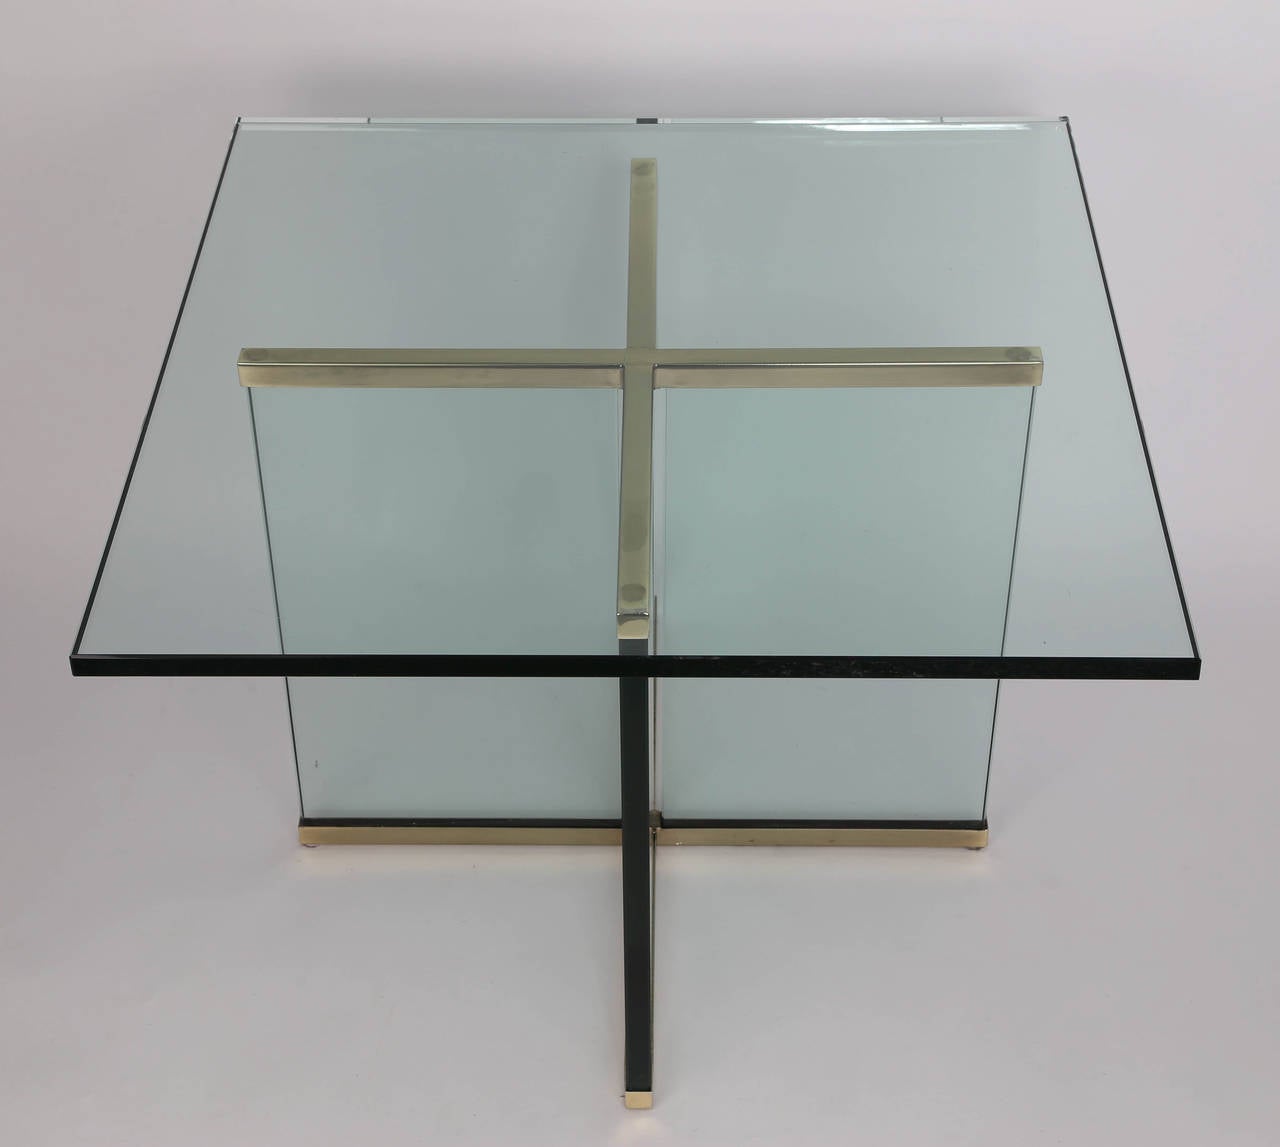 Large end table features an X-shaped base composed of two brass frames securing four slabs of 3/4